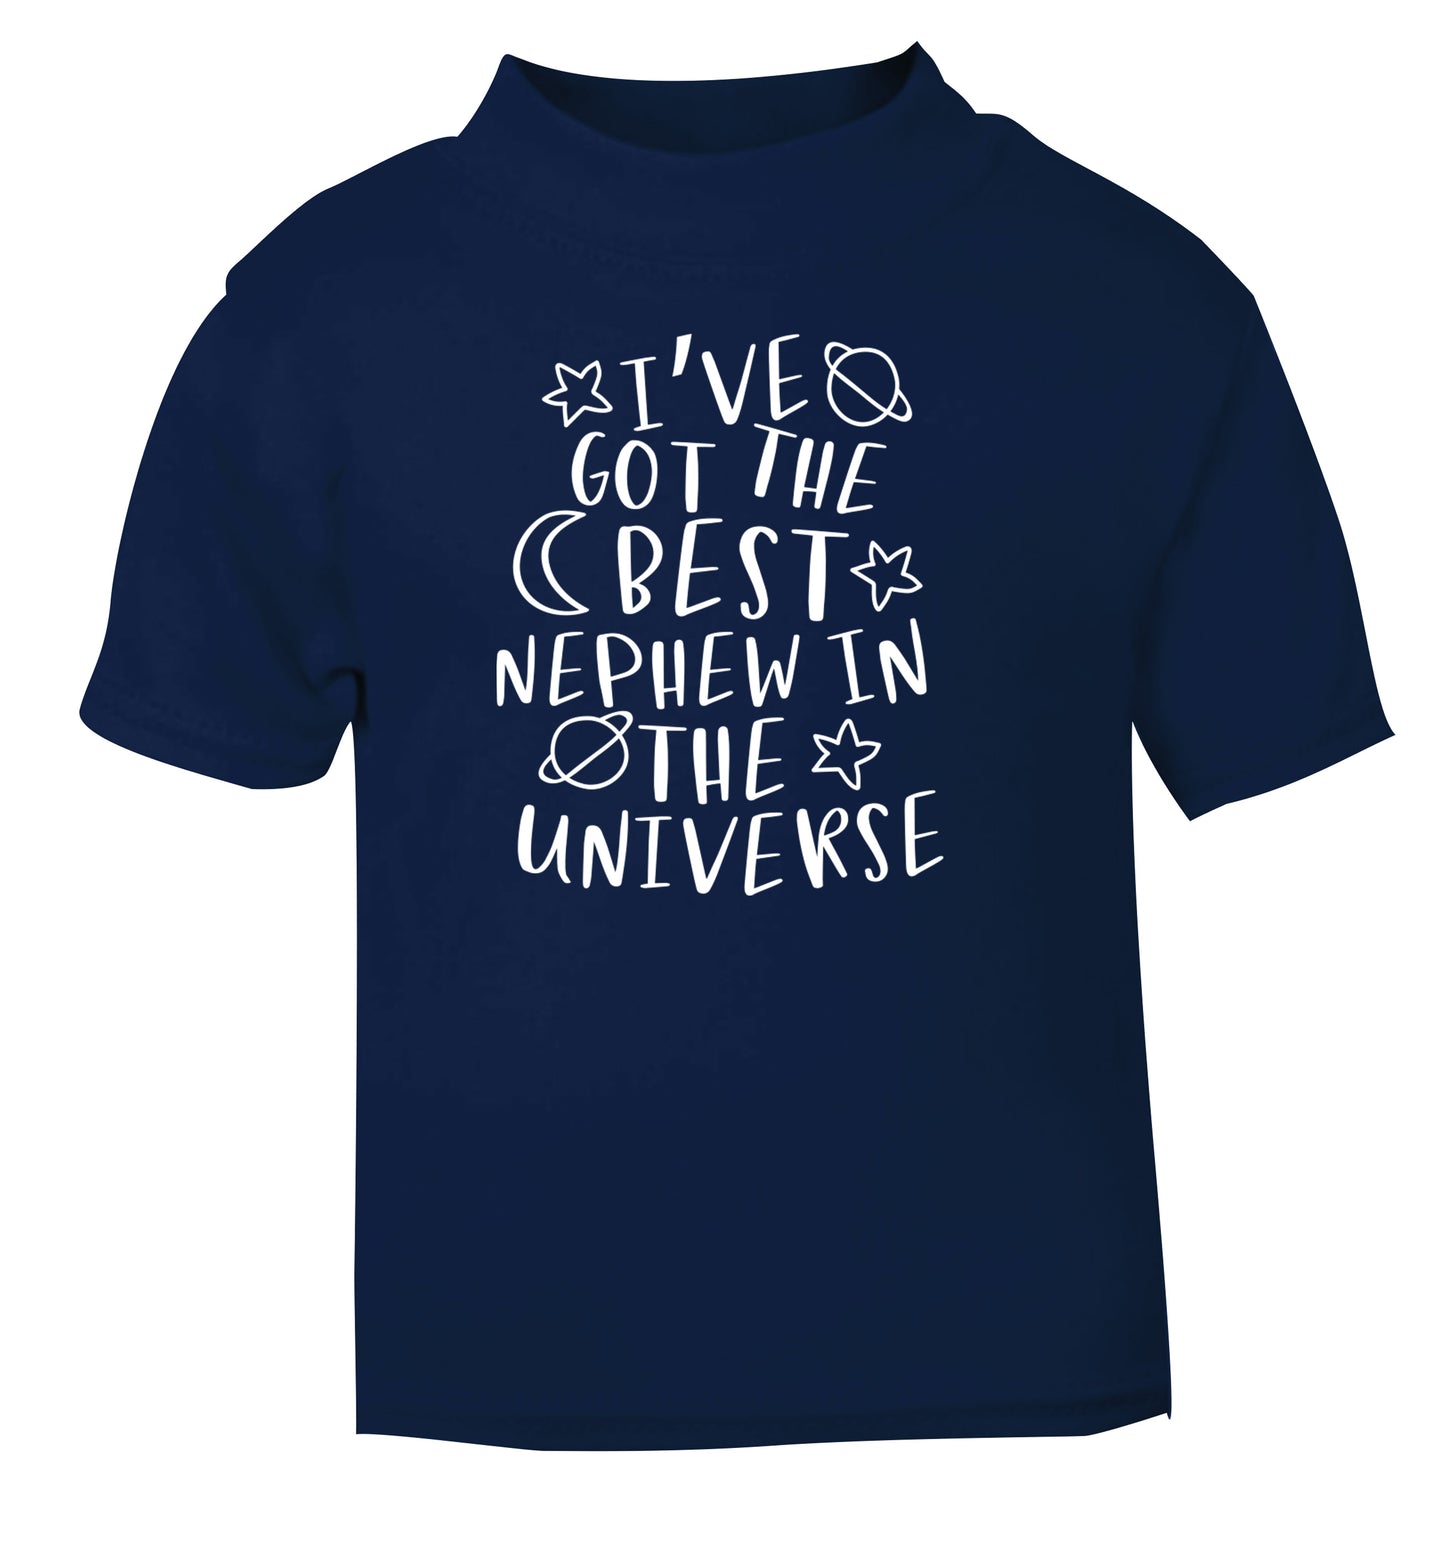 I've got the best nephew in the universe navy Baby Toddler Tshirt 2 Years